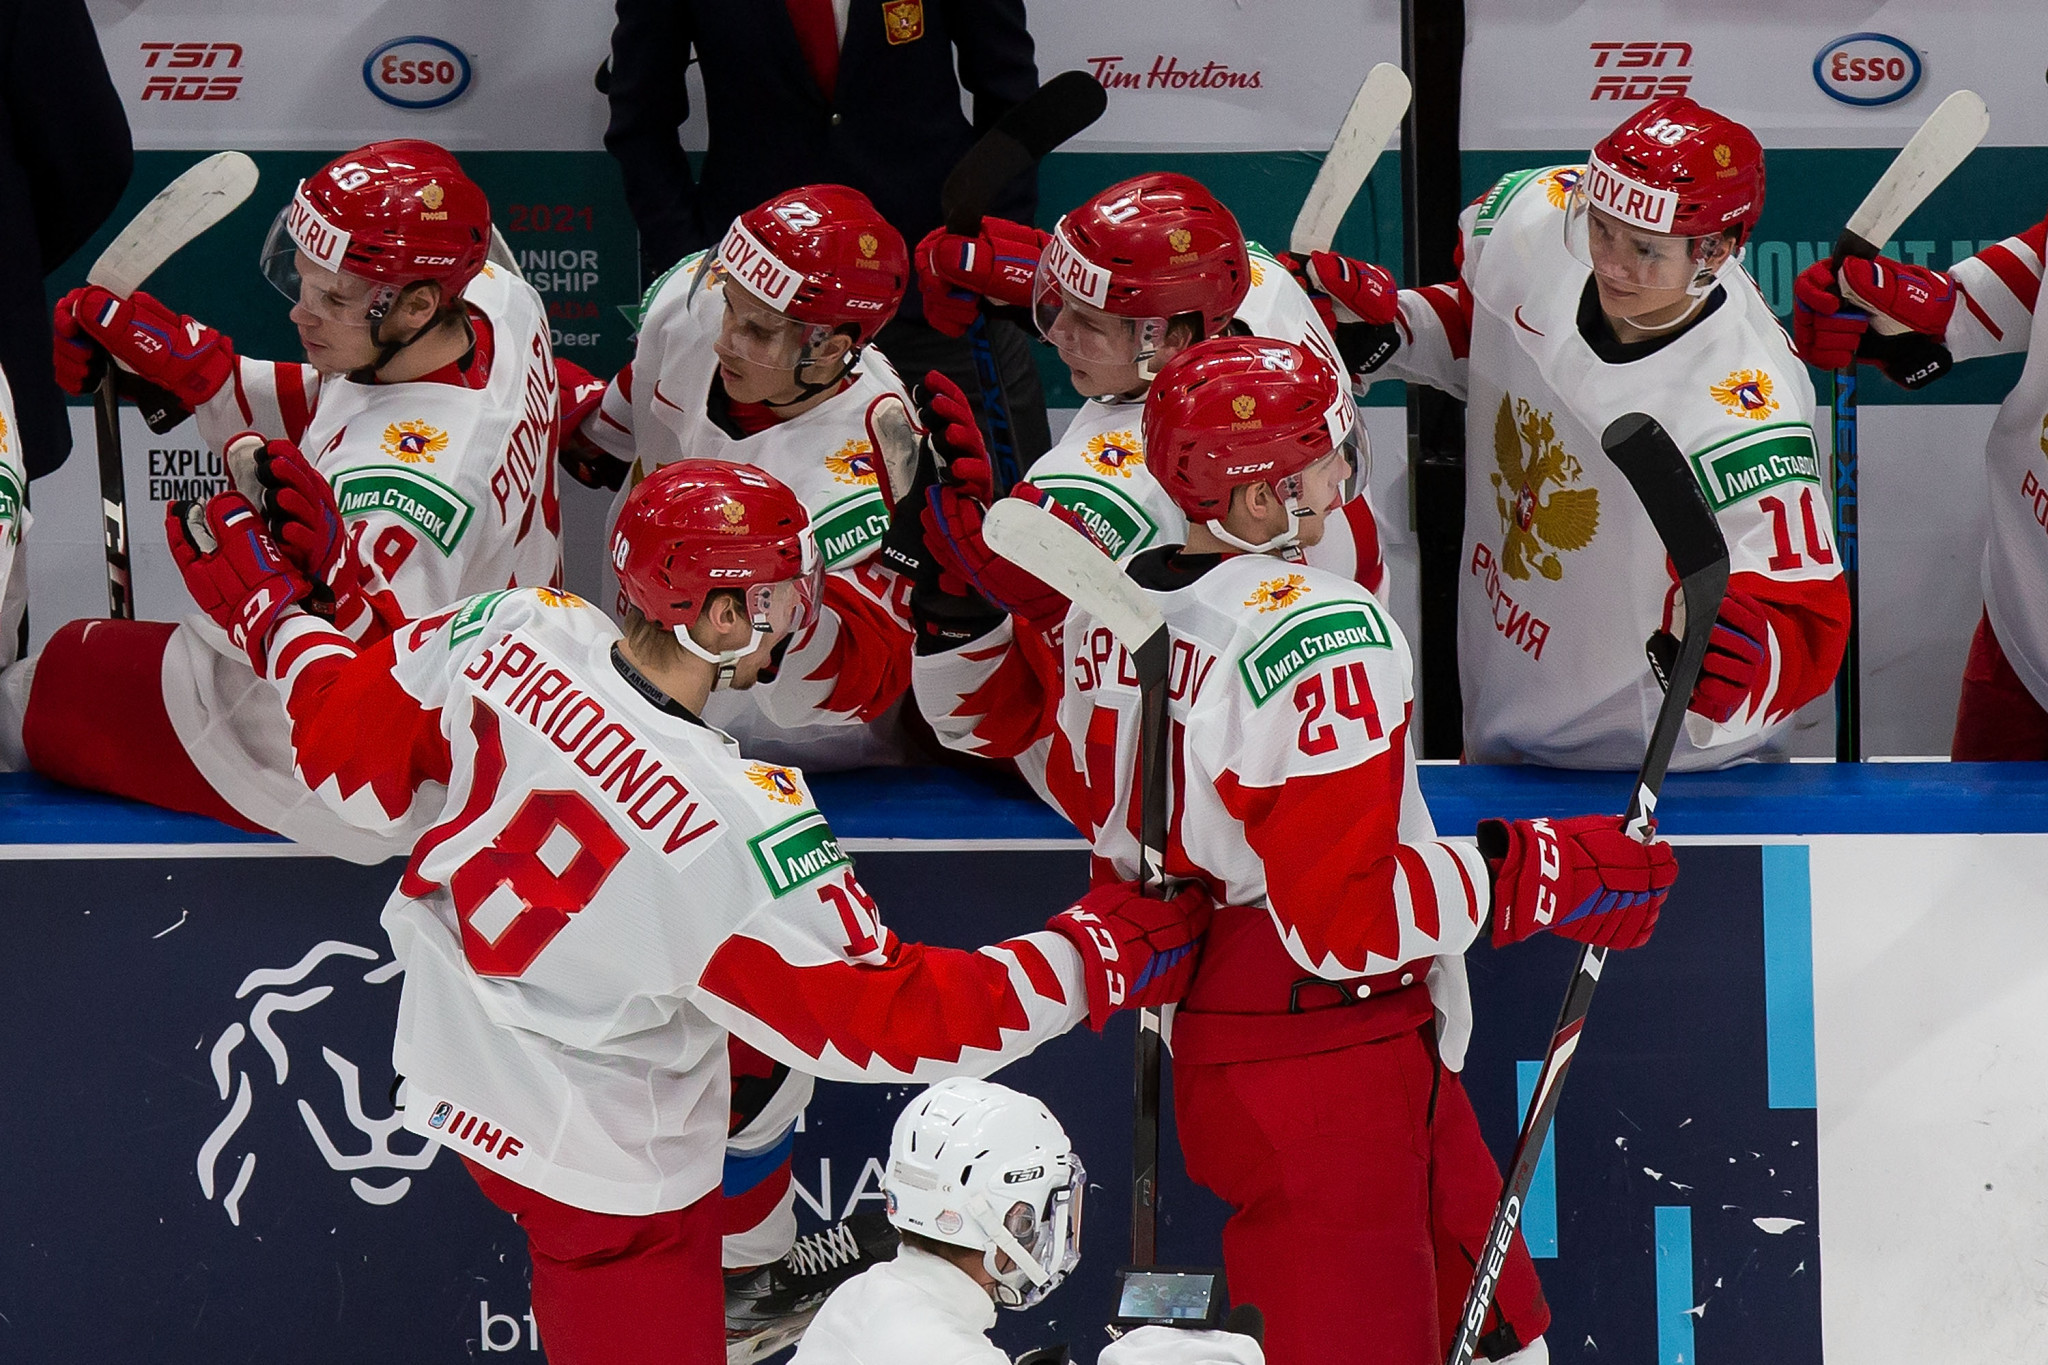 Russia, along with Belarus, have been banned from the IIHF World Junior Championship ©Getty Images